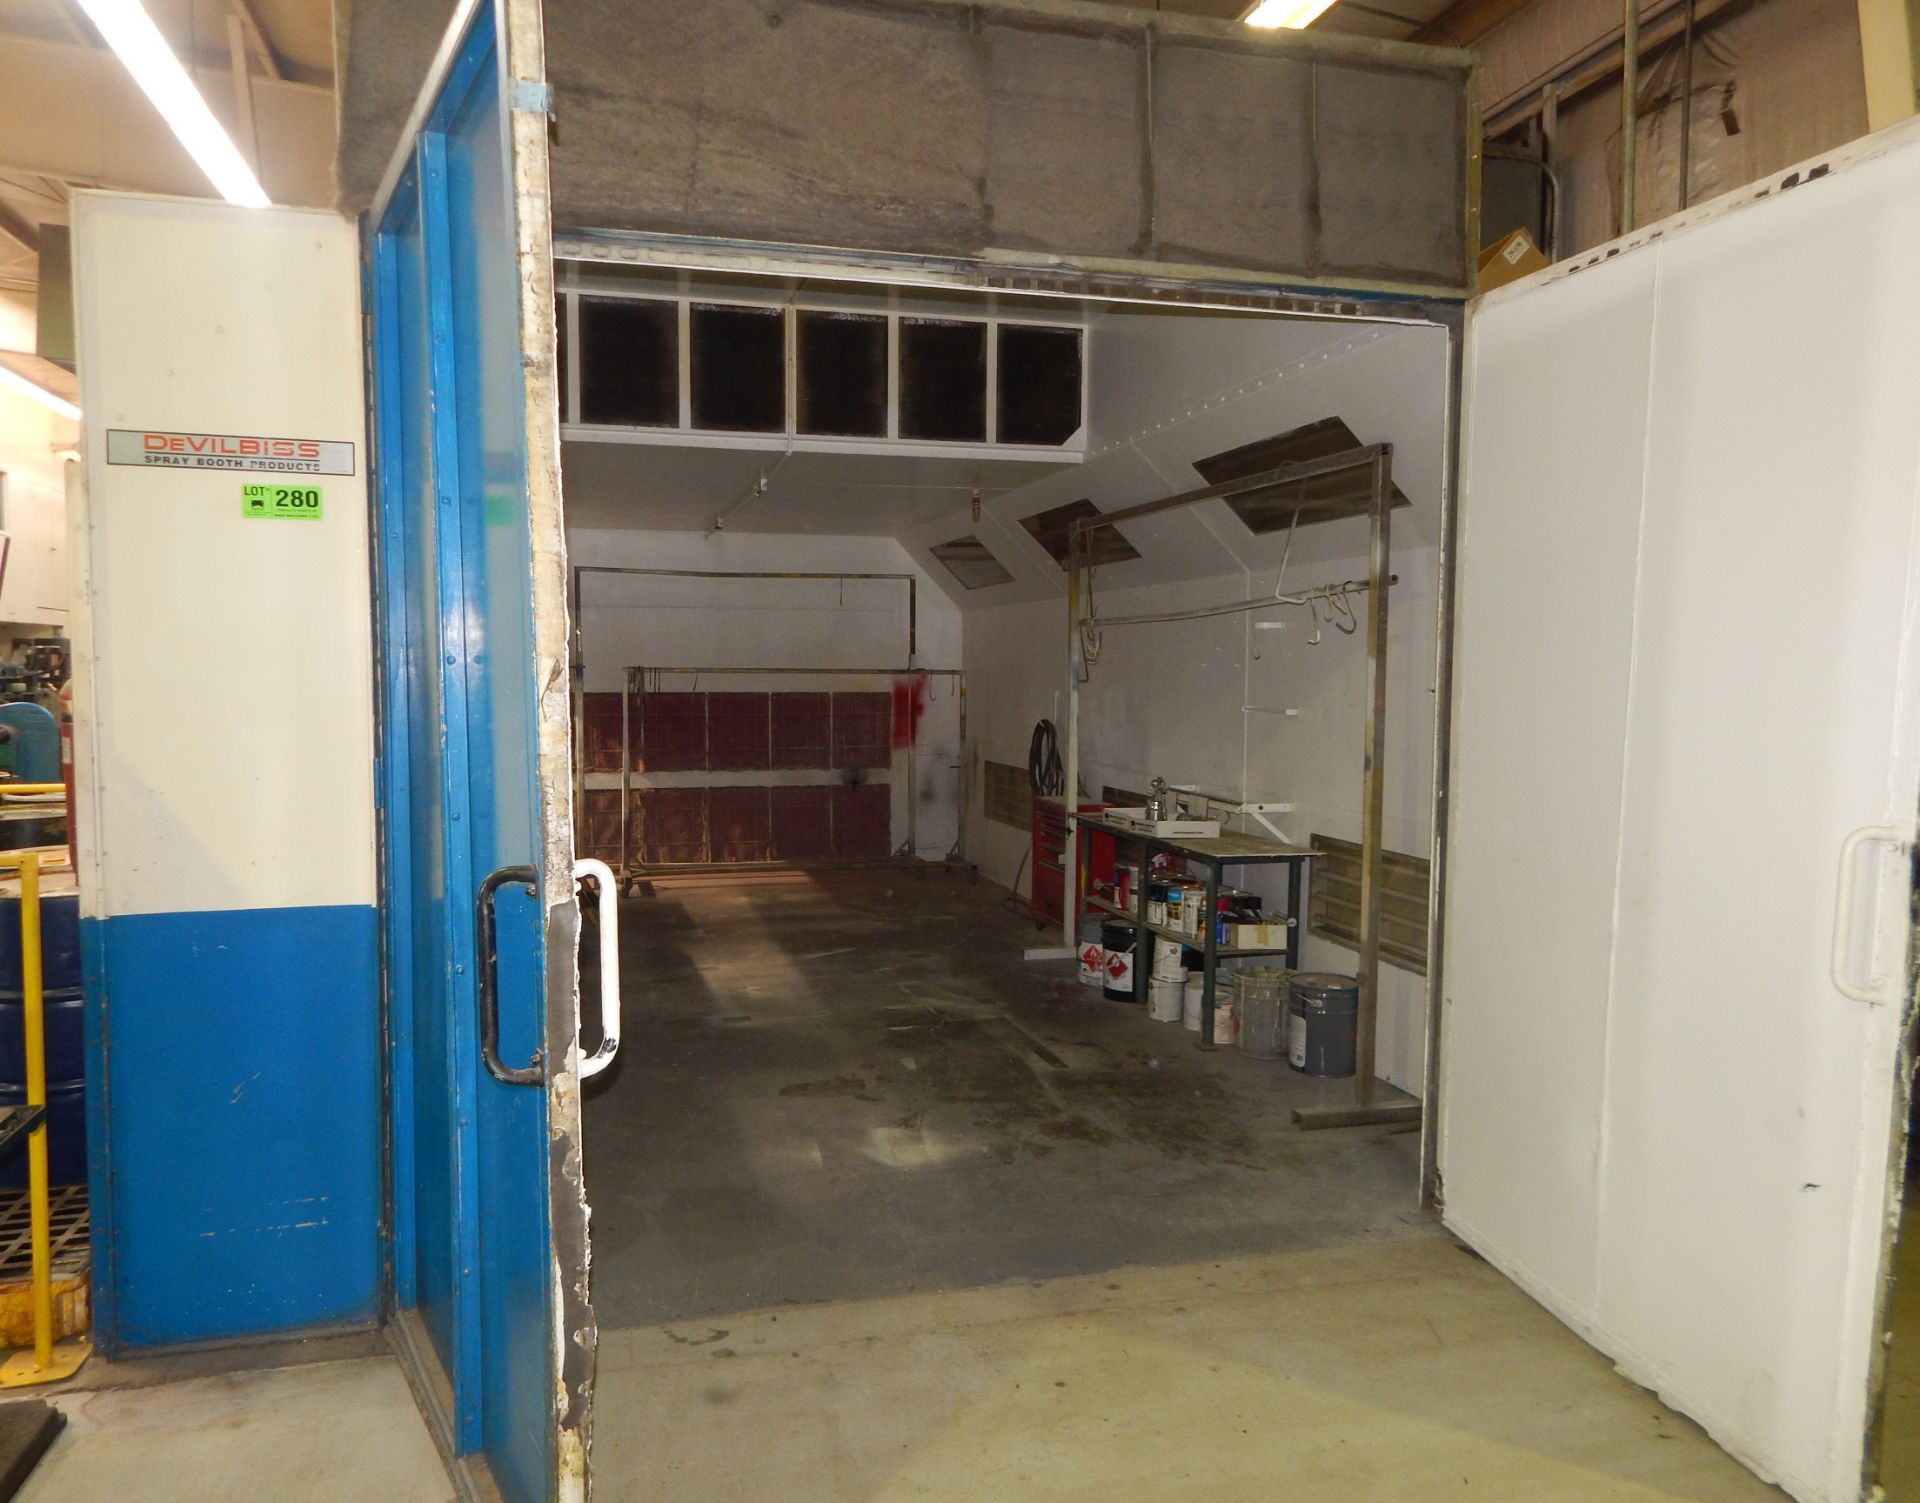 DEVILBISS APPROX 15' X 23' AUTOMOTIVE PAINT BOOTH WITH LIGHTS, EXHAUST, INDEPENDENT FIRE SUPPRESSION - Image 2 of 3